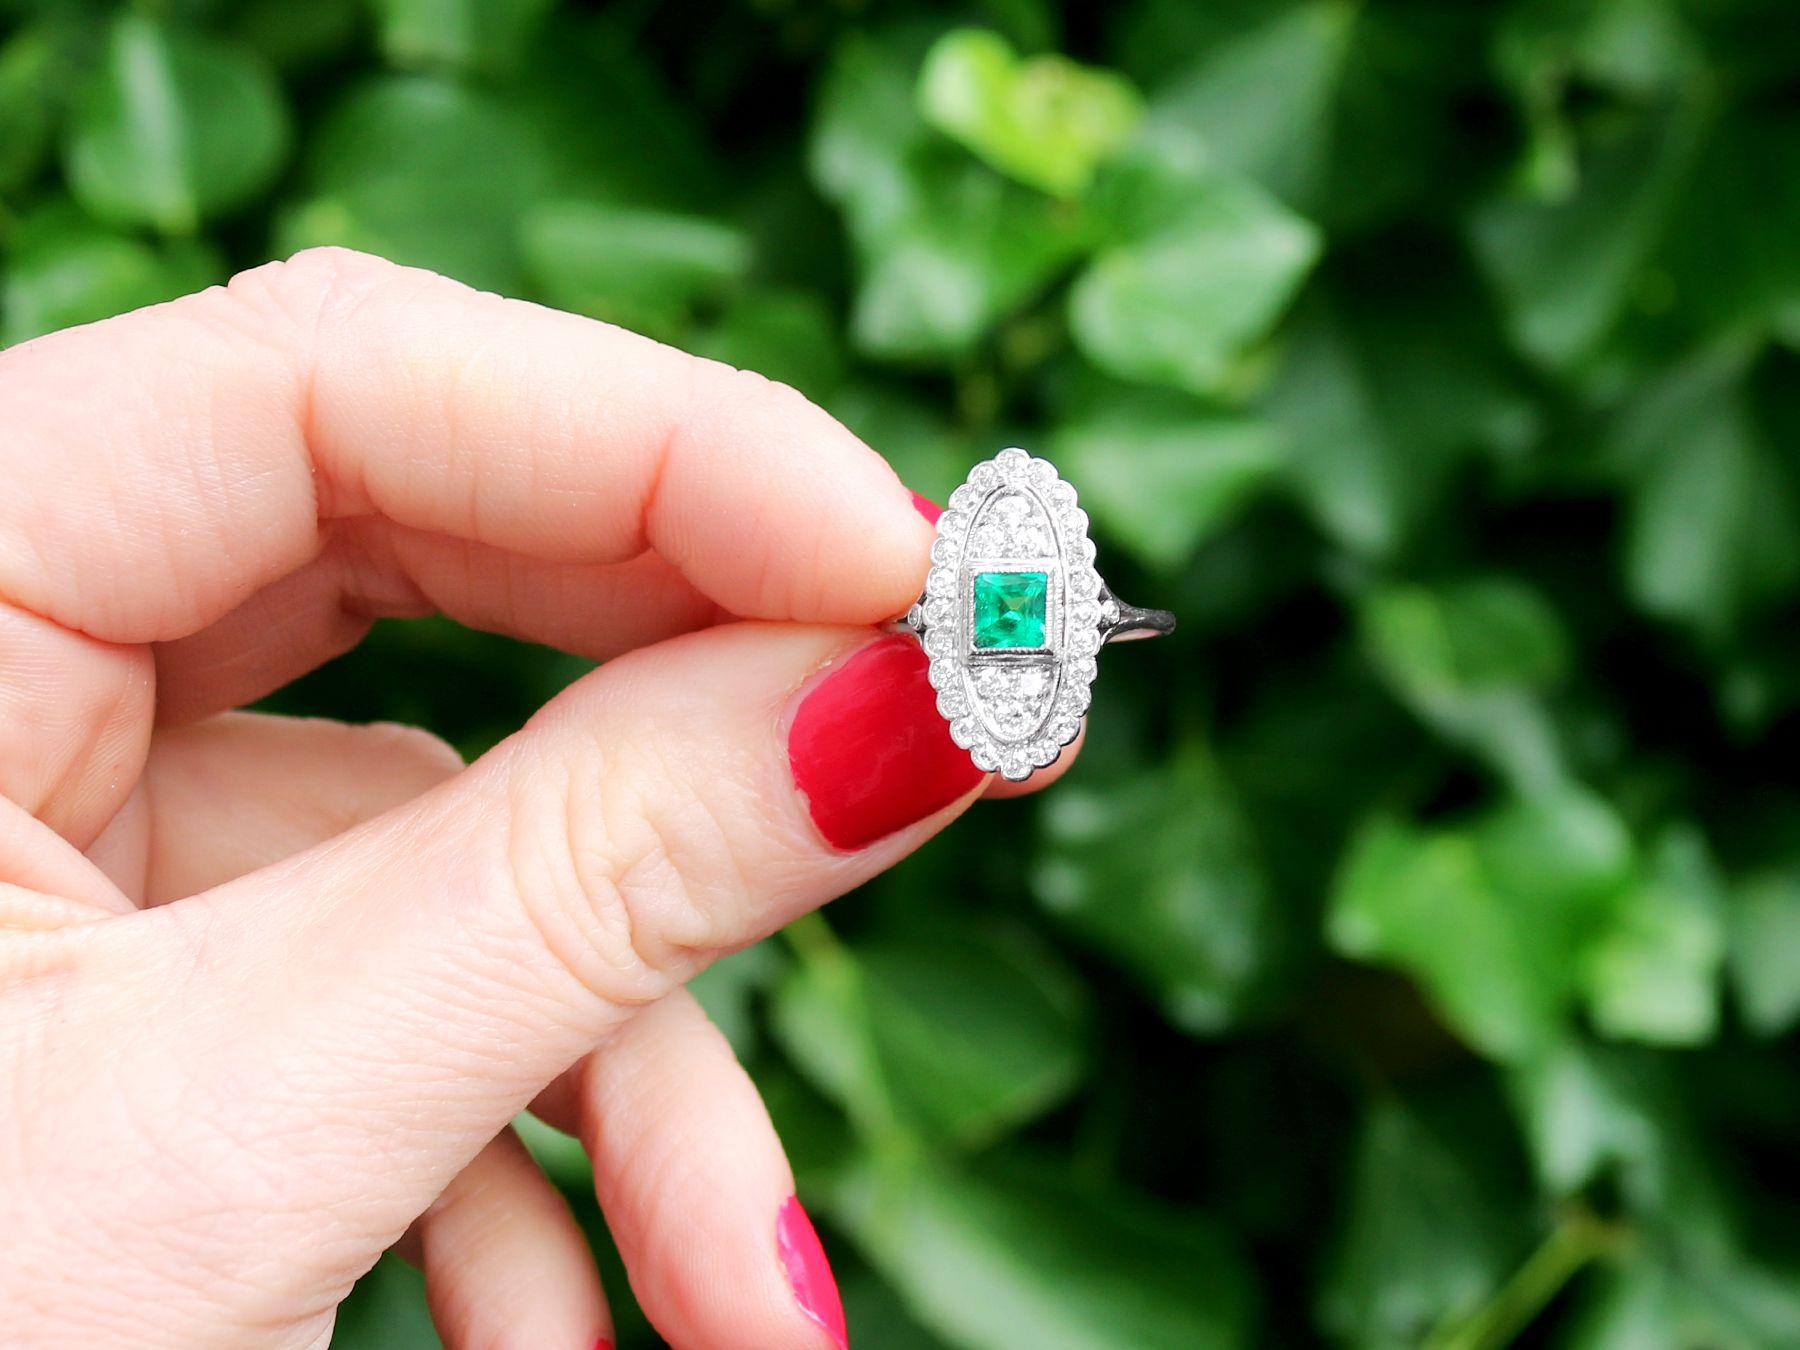 A stunning, fine and impressive antique 0.57 carat emerald and 1.20 carat diamond, platinum dress ring; part of our diverse antique estate jewelry collections.

This stunning, fine and impressive antique emerald ring has been crafted in